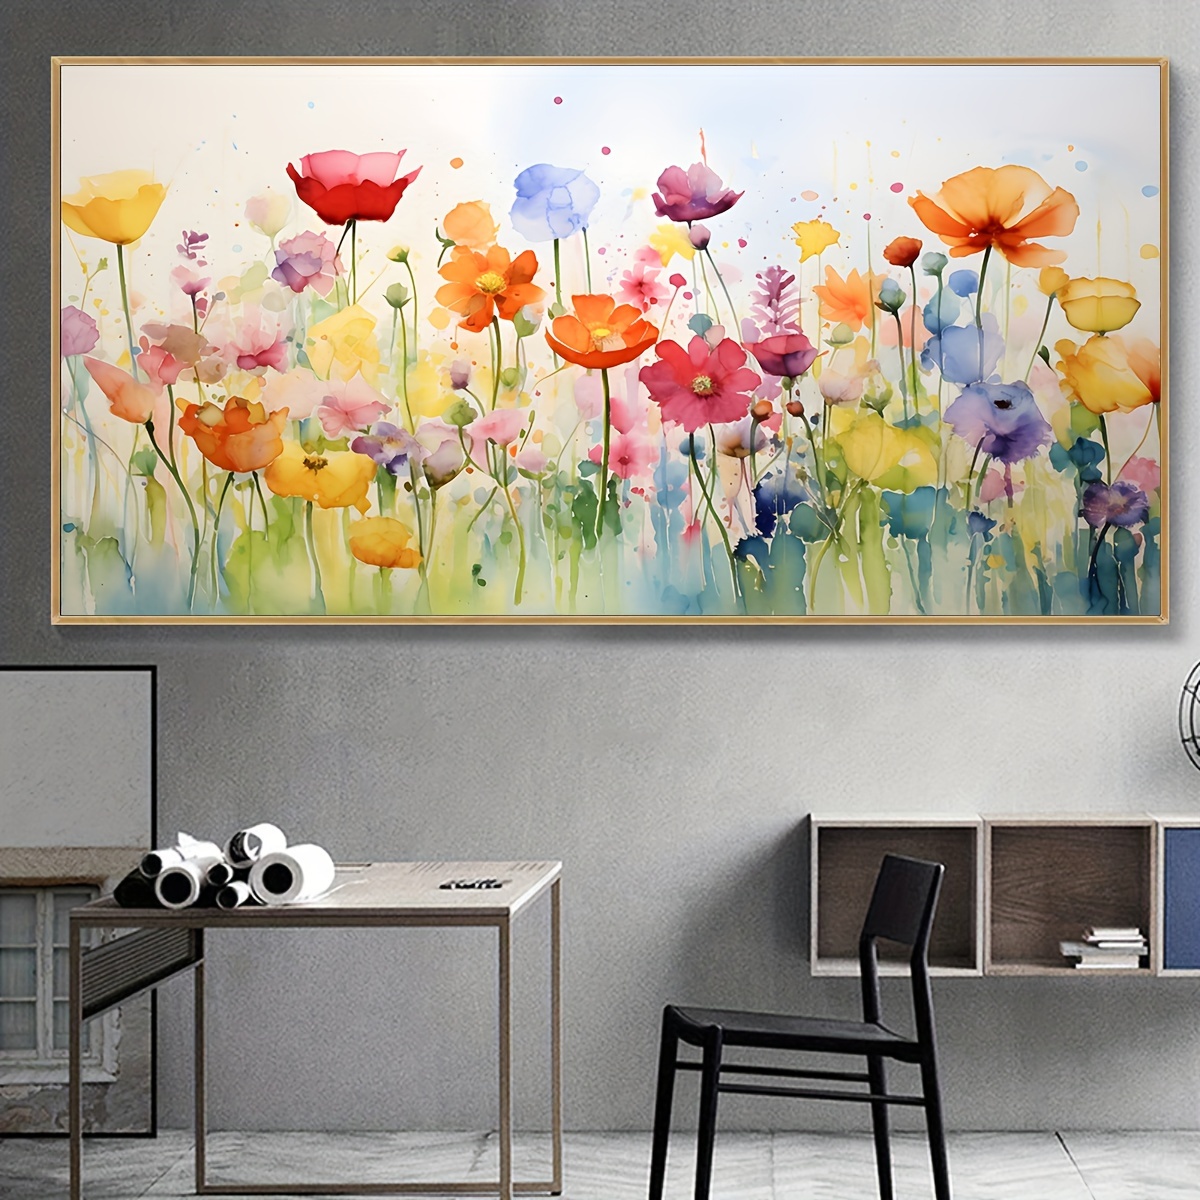 

1pc Unframed Canvas Poster, Modern Art, Colorful Flowers Wall Art, Ideal Gift For Bedroom Living Room Corridor, Wall Art, Wall Decor, Winter Decor, Room Decoration